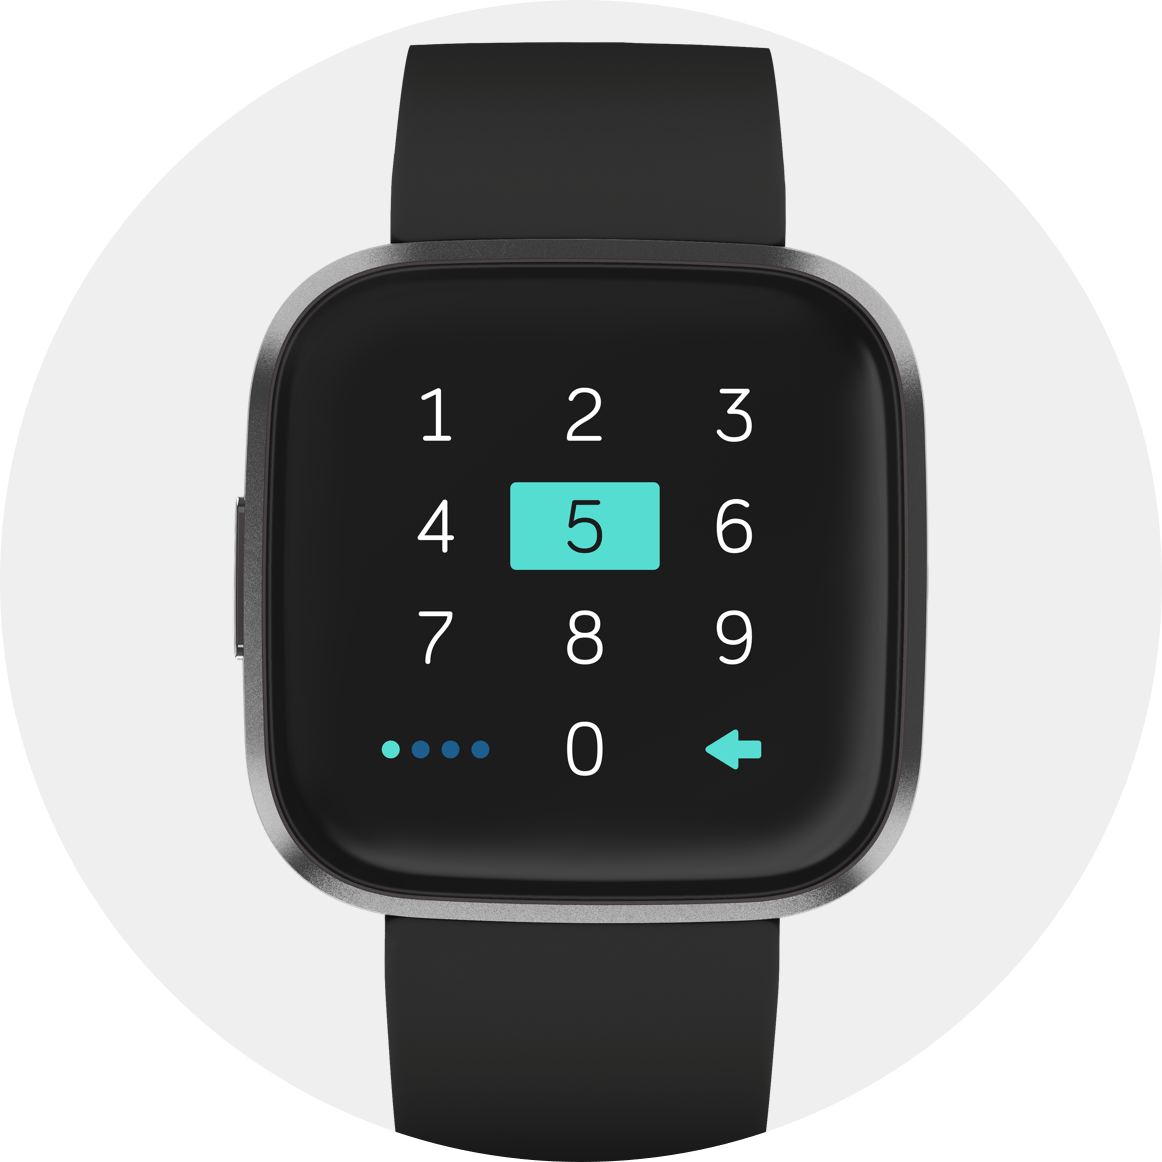 barclays fitbit pay